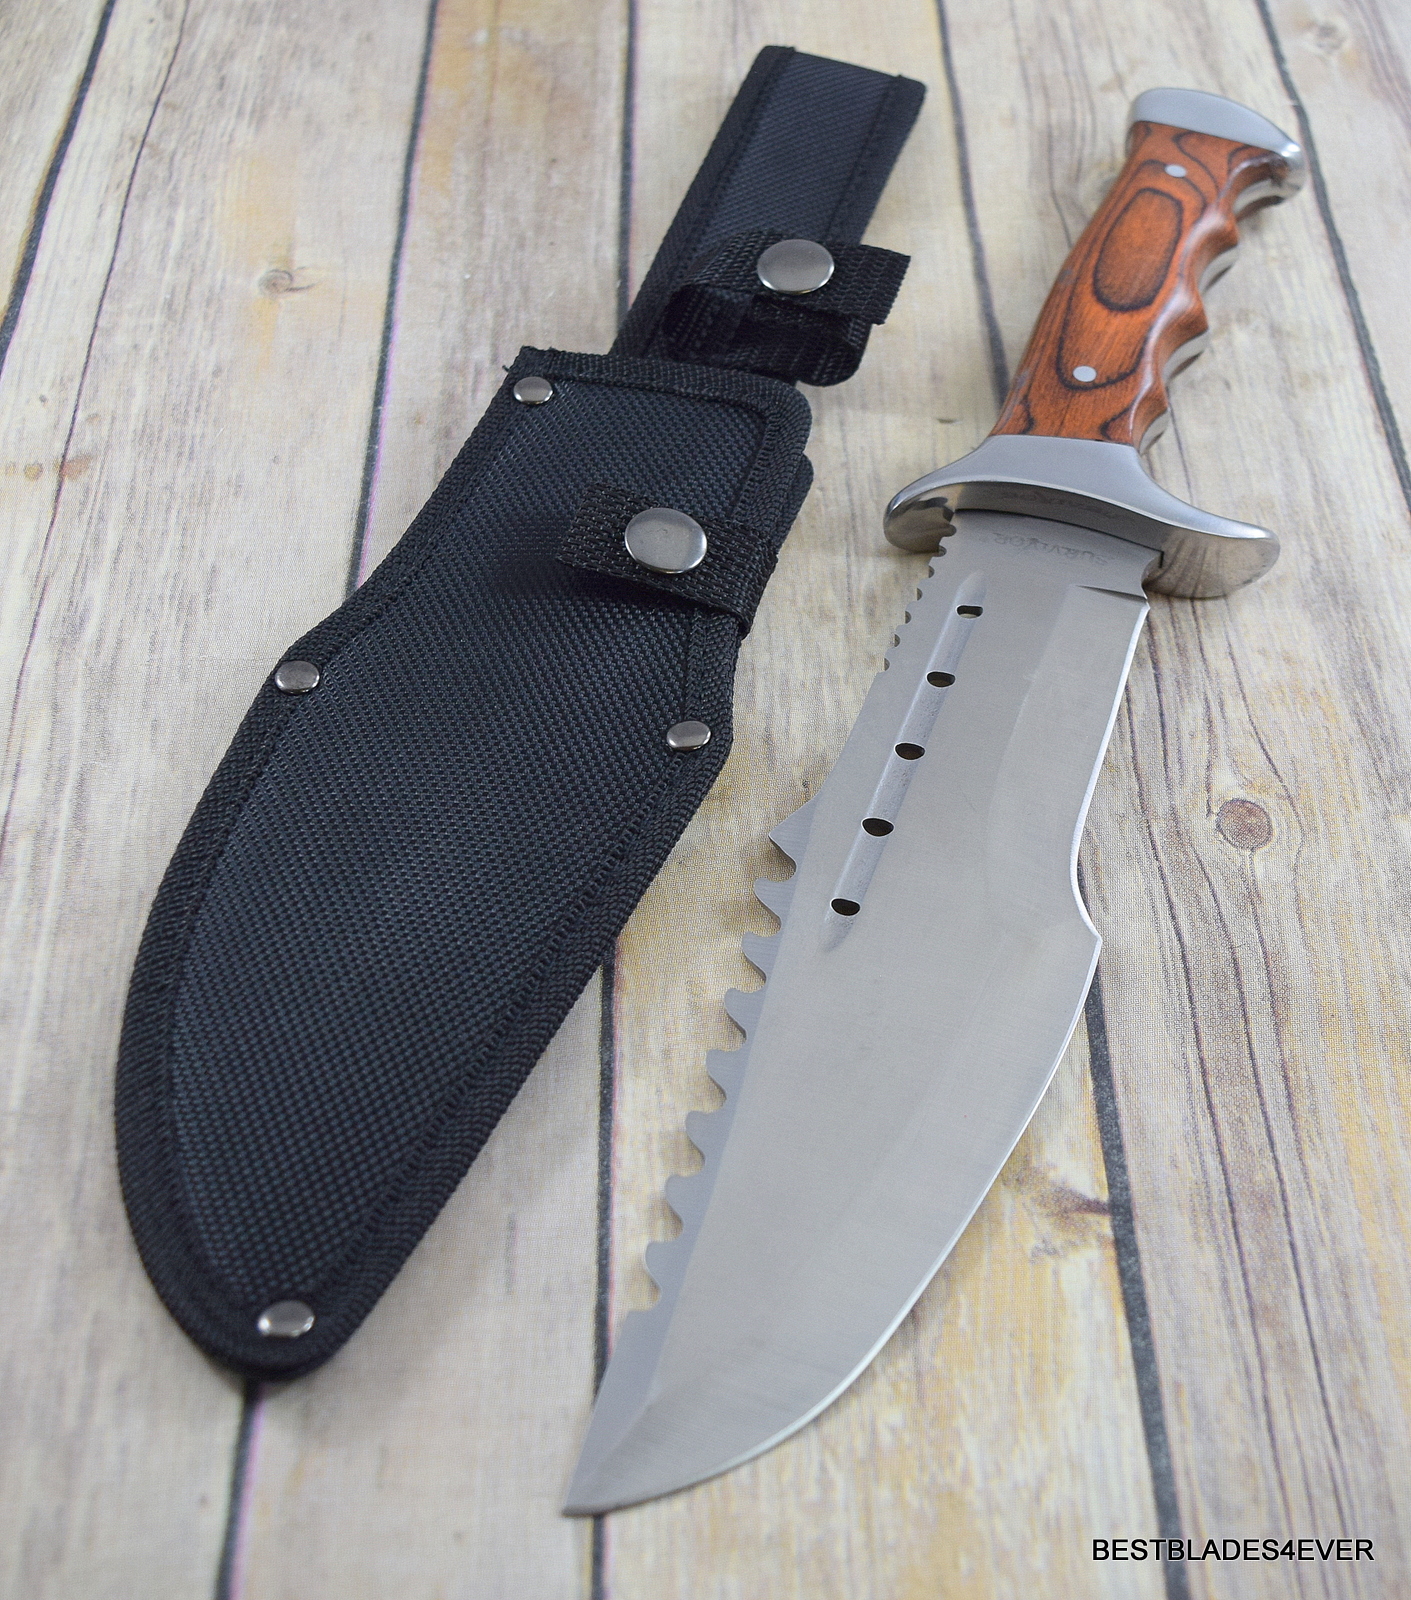 13.75" SURVIVOR FULL TANG BOWIE HUNTING SURVIVAL KNIFE WITH NYLON SHEATH